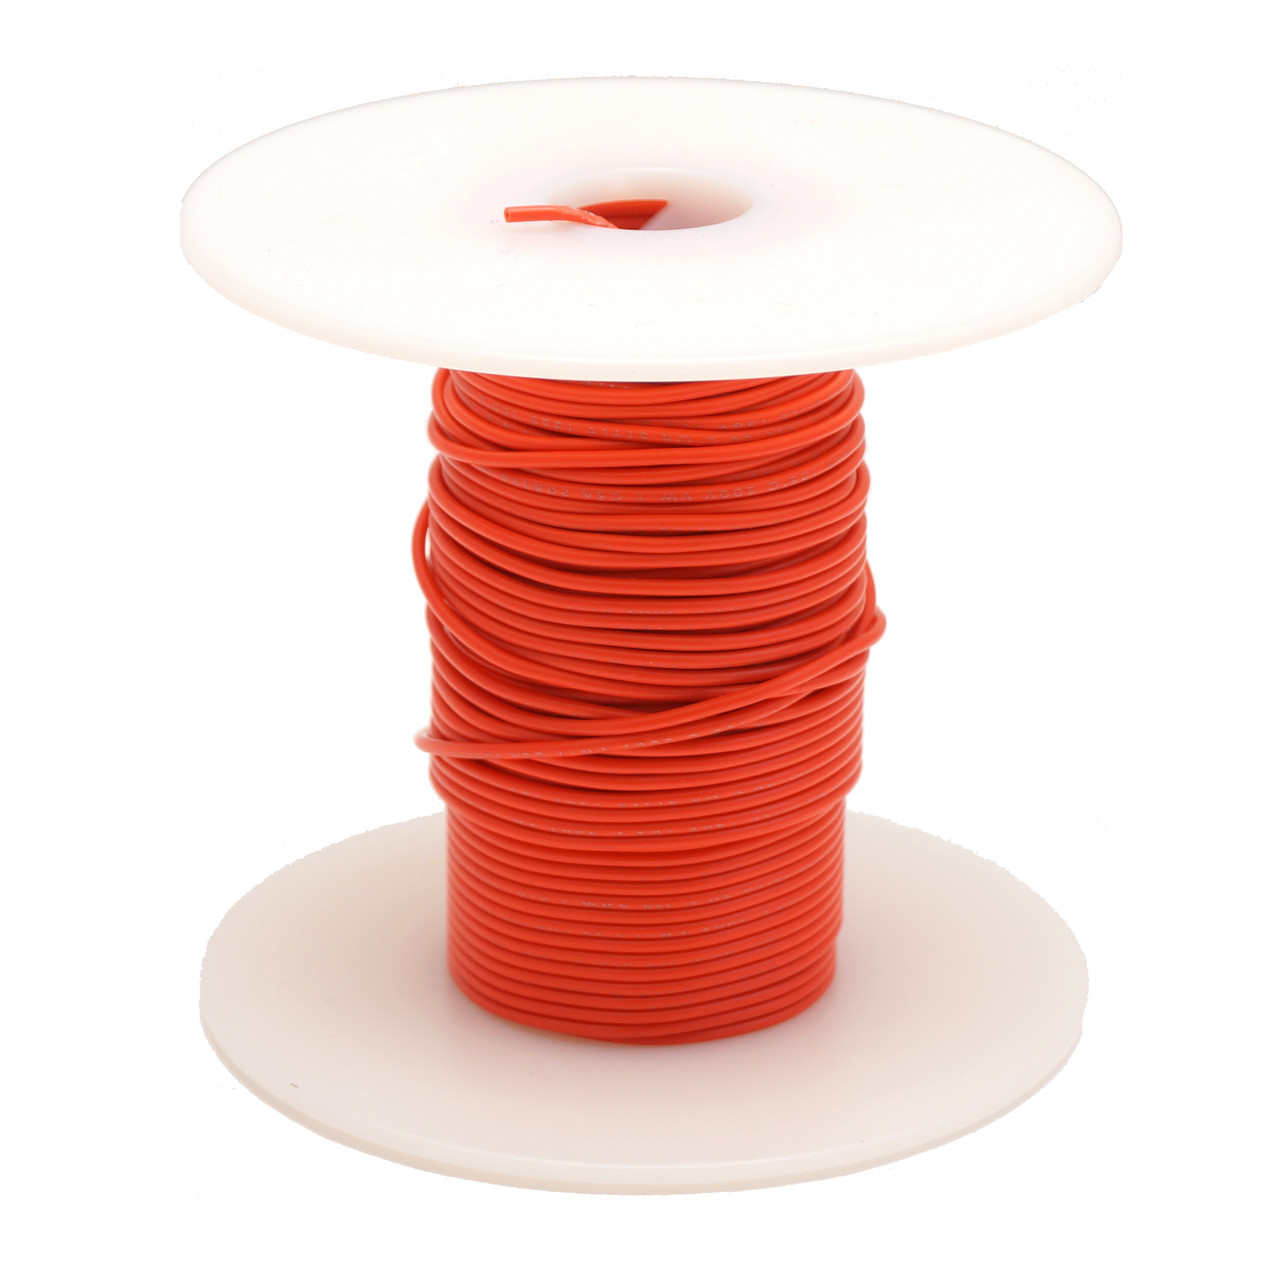 Hook-Up Wire - 24AWG Pre-Bond - 100 Foot Spool